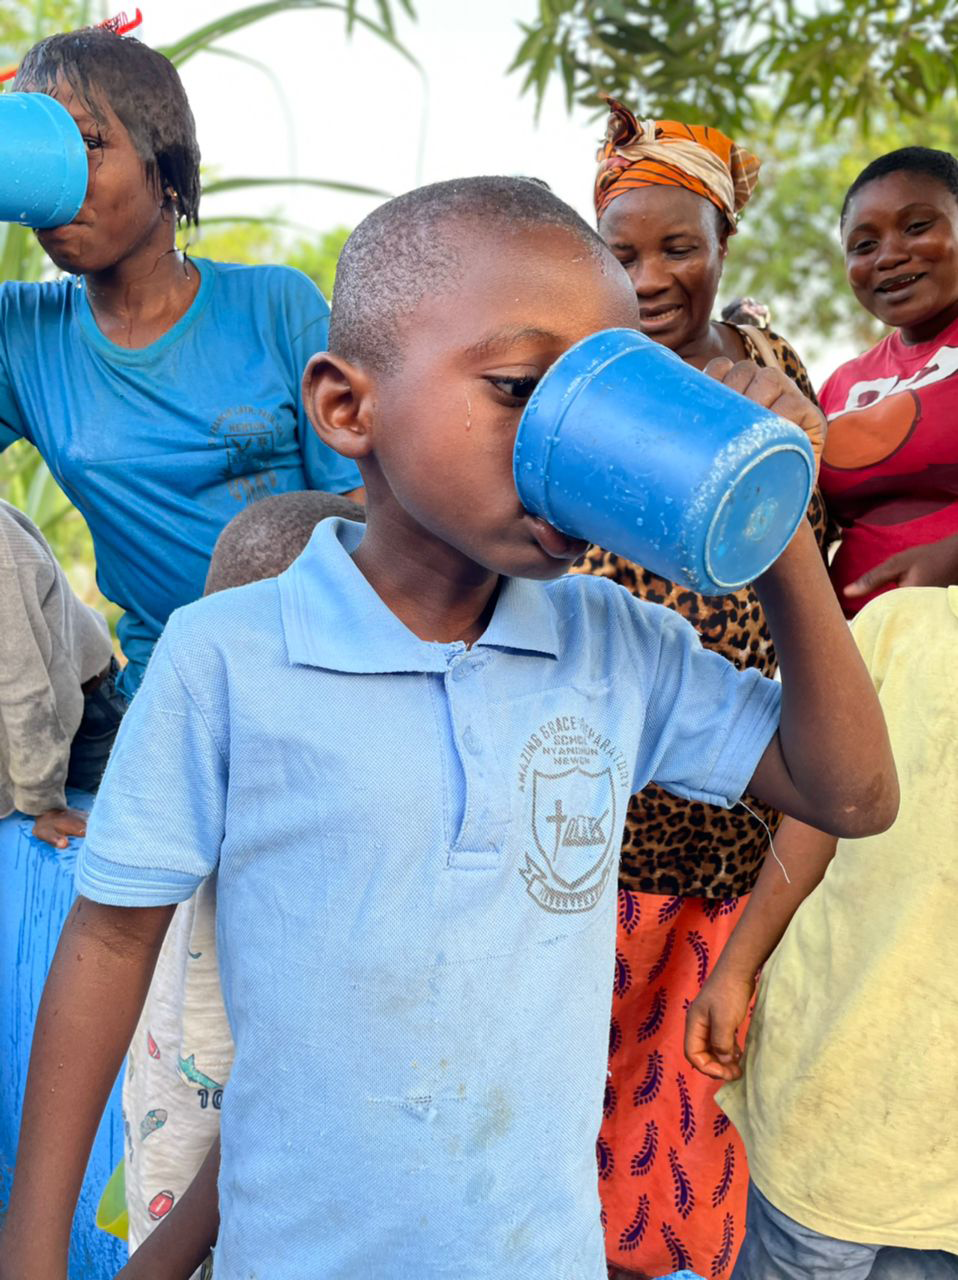 Sierra Leone local community finally has access to drinking water